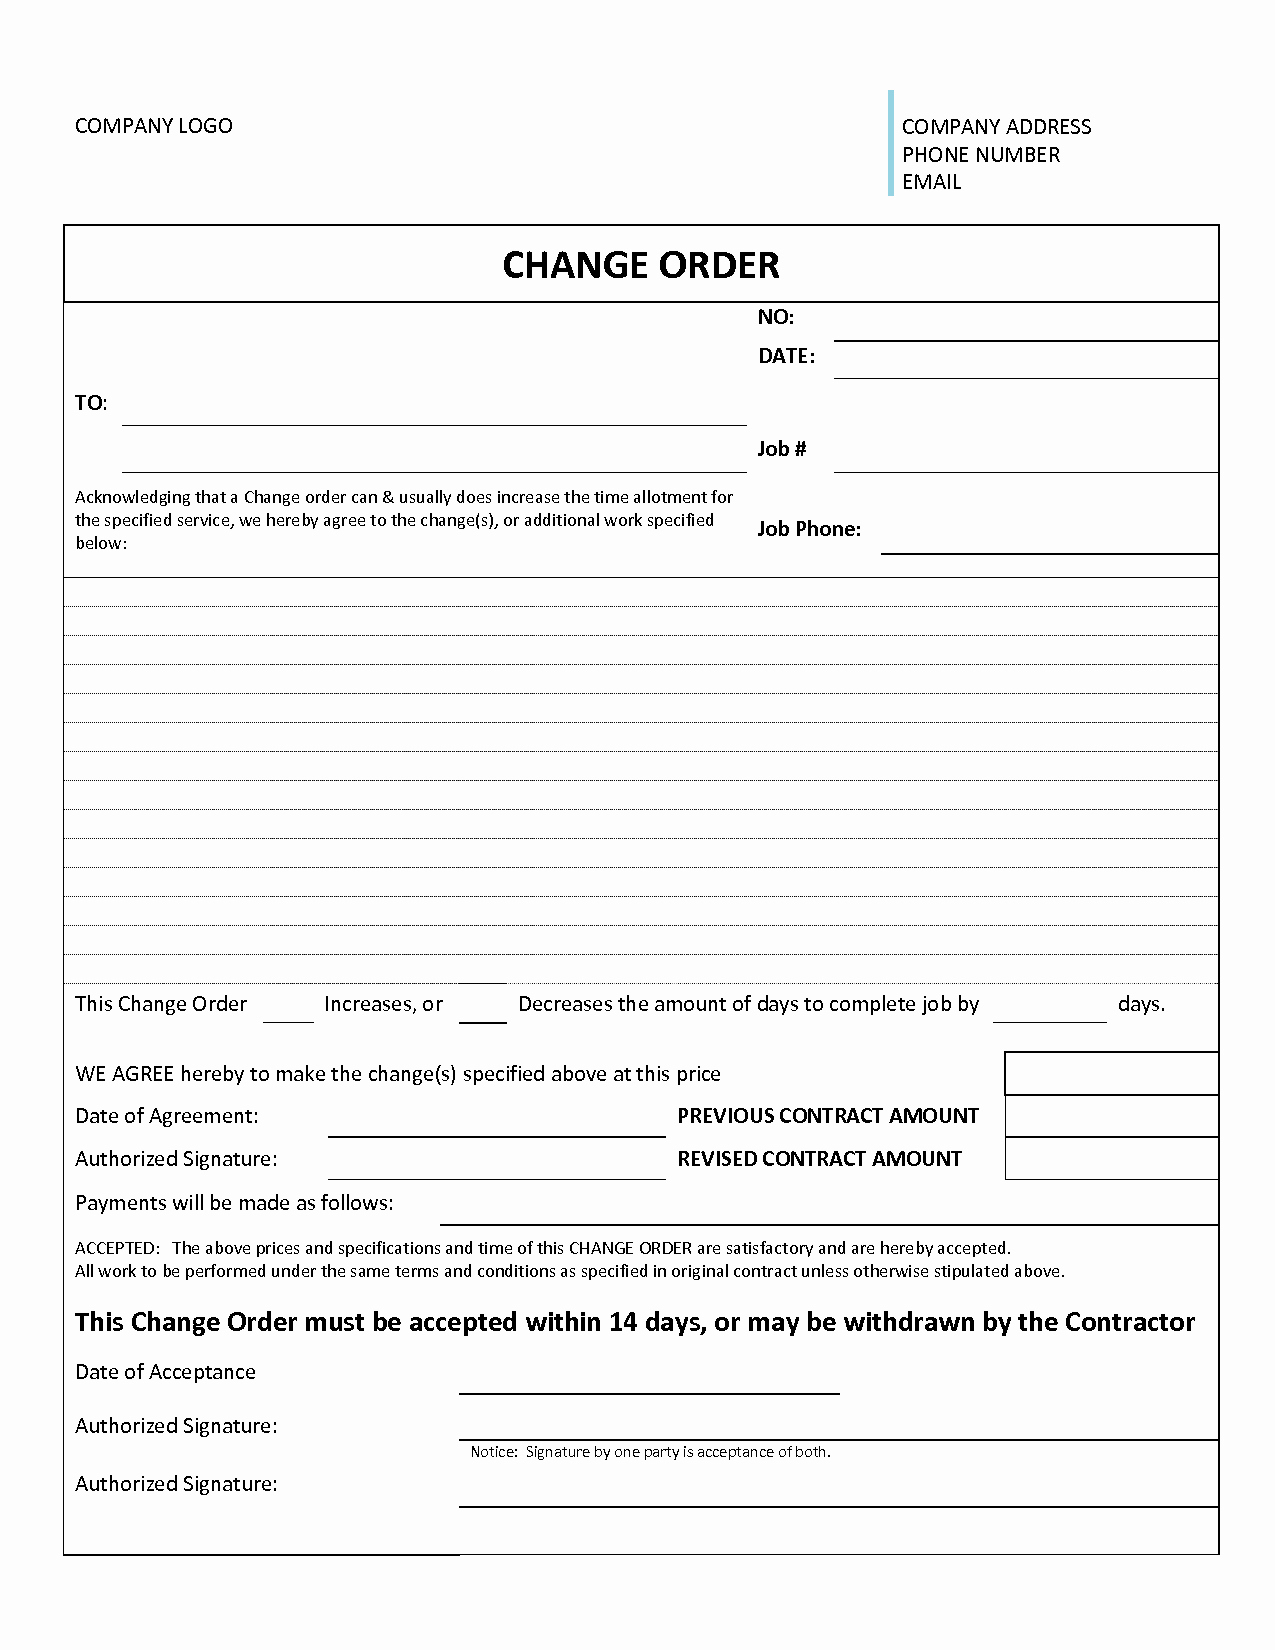 Change order forms Template Inspirational Change order form Template